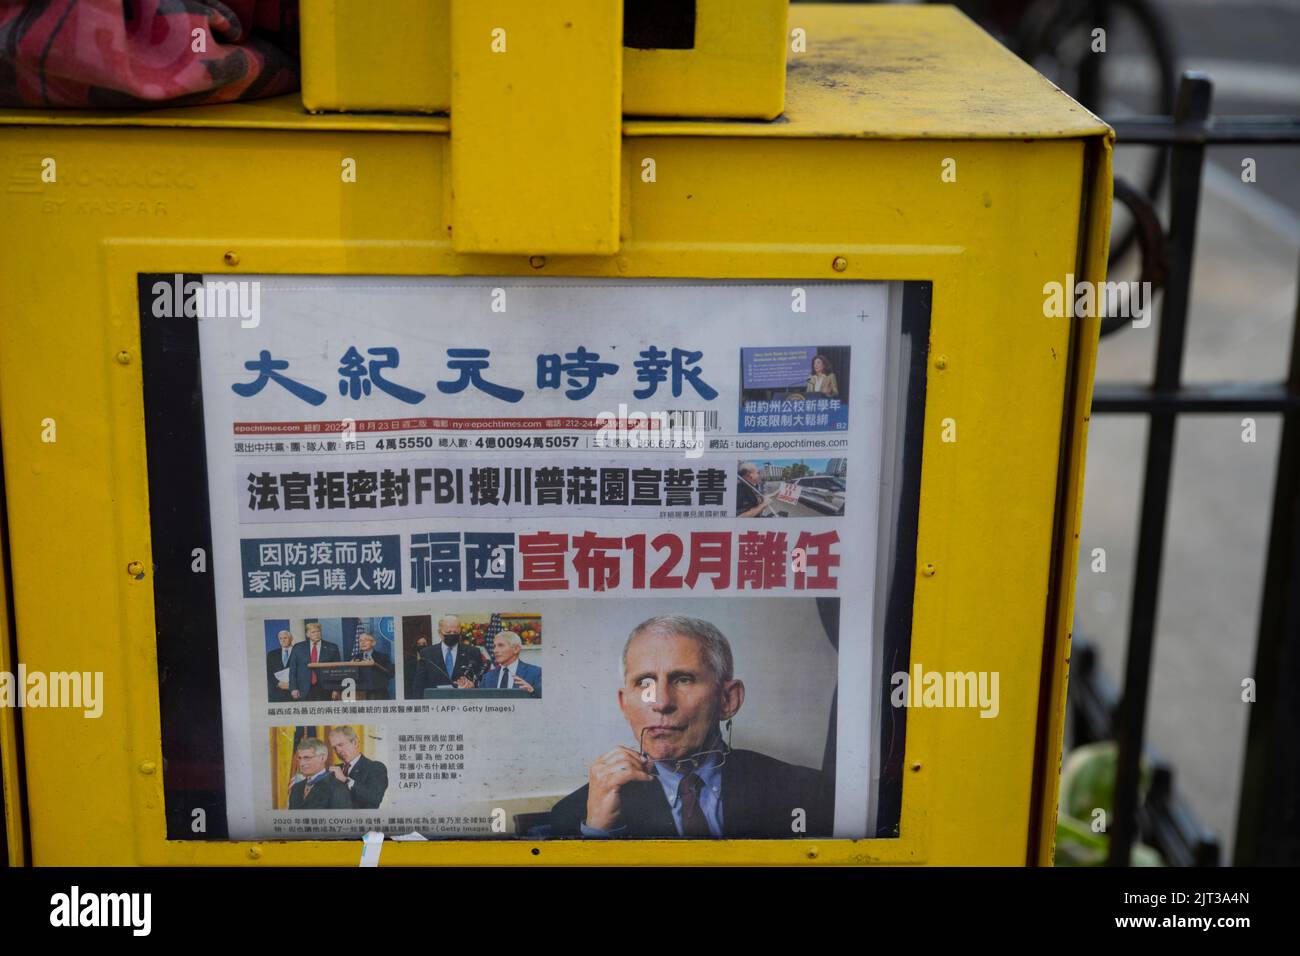 New York, New York, USA. 23rd Aug, 2022. August 23, 2022: A Chinese-language edition of the Falun Gong/Falun Dafa newspaper outlet the Epoch Times showing Dr. Anthony Fauci of the CDC's retirement announcement. The Epoch Times was one of the largest spenders of Facebook and Meta advertisement money in support of former President Donald Trump for his staunch opposition to the Chinese Communist Party (CCP) The People's Republic of China has declared the Falun Gong religion as an illegal cult and harshly prosecutes members of the faith in what many NGOs call a human rights abuse. (Credit Image: Stock Photo